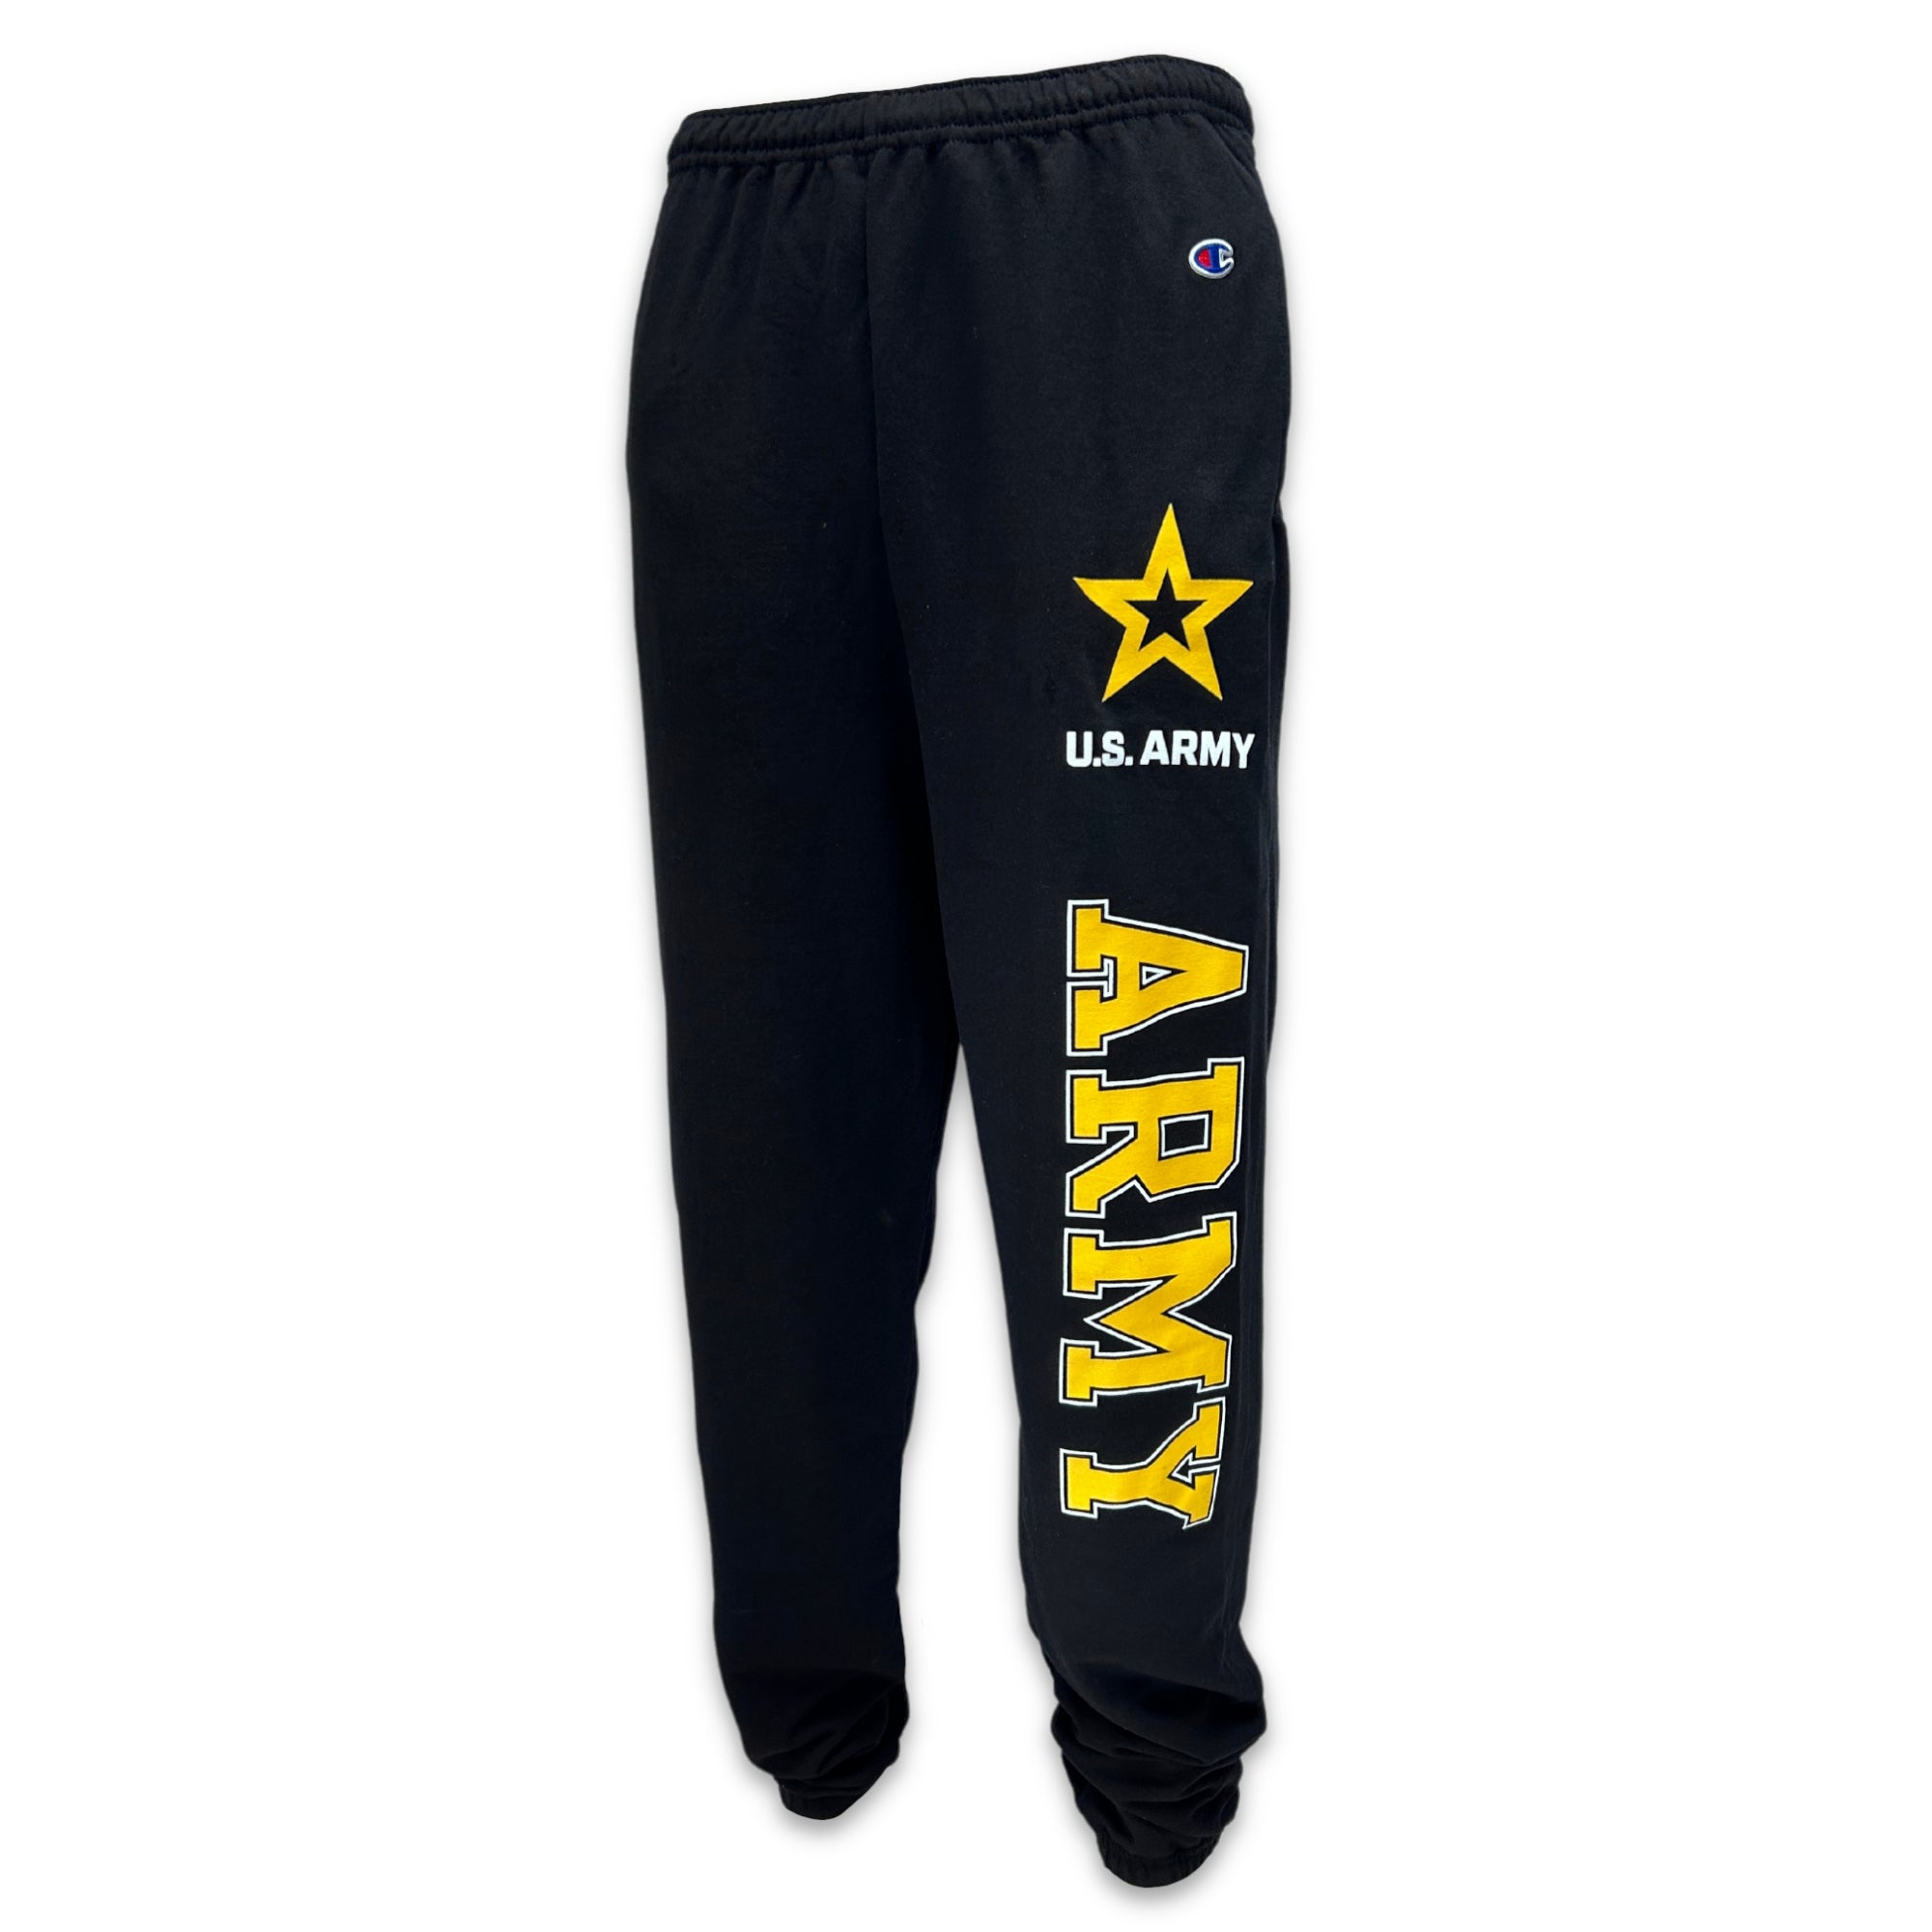 U.S. Army Pants & Shorts: Army Champion Fleece Banded Sweatpants in Black